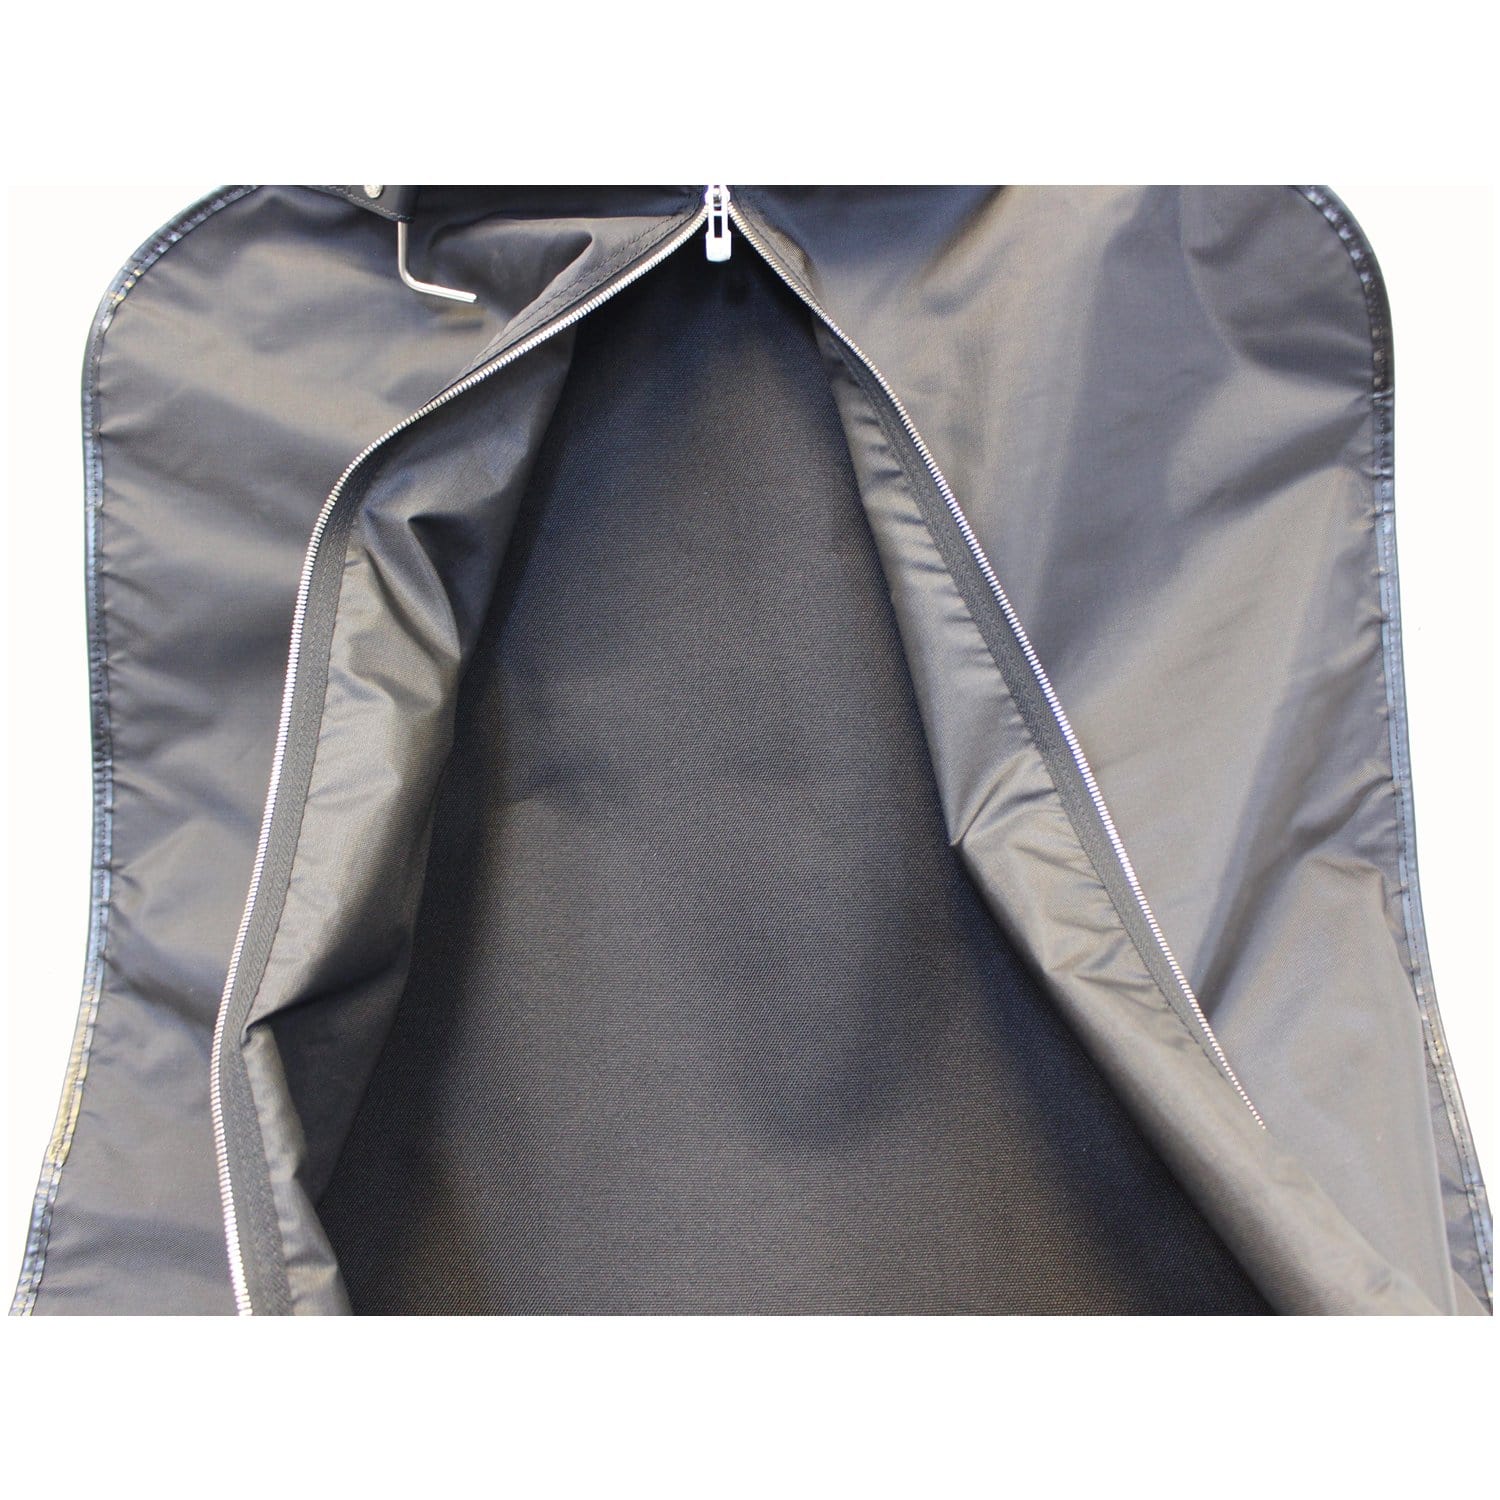 French Company for Louis Vuitton Garment Bag (Lot 1419 - Estate Jewelry &  Sterling Silver Sep 24, 2020, 10:00am)